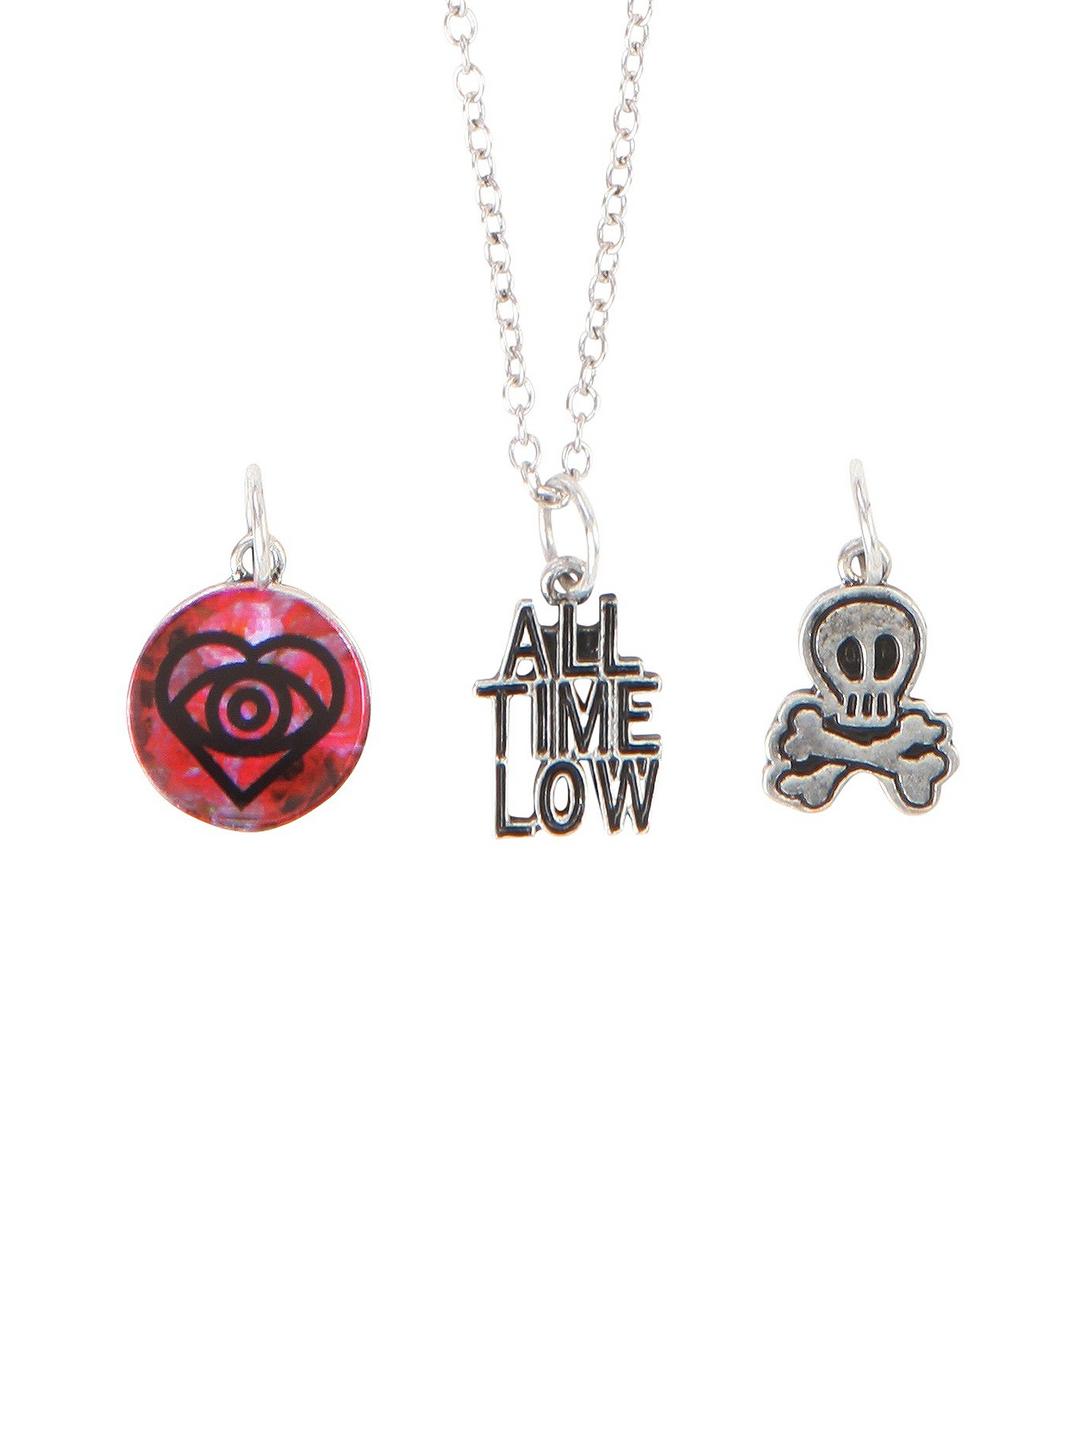 All Time Low Interchangeable Charm Necklace, , hi-res